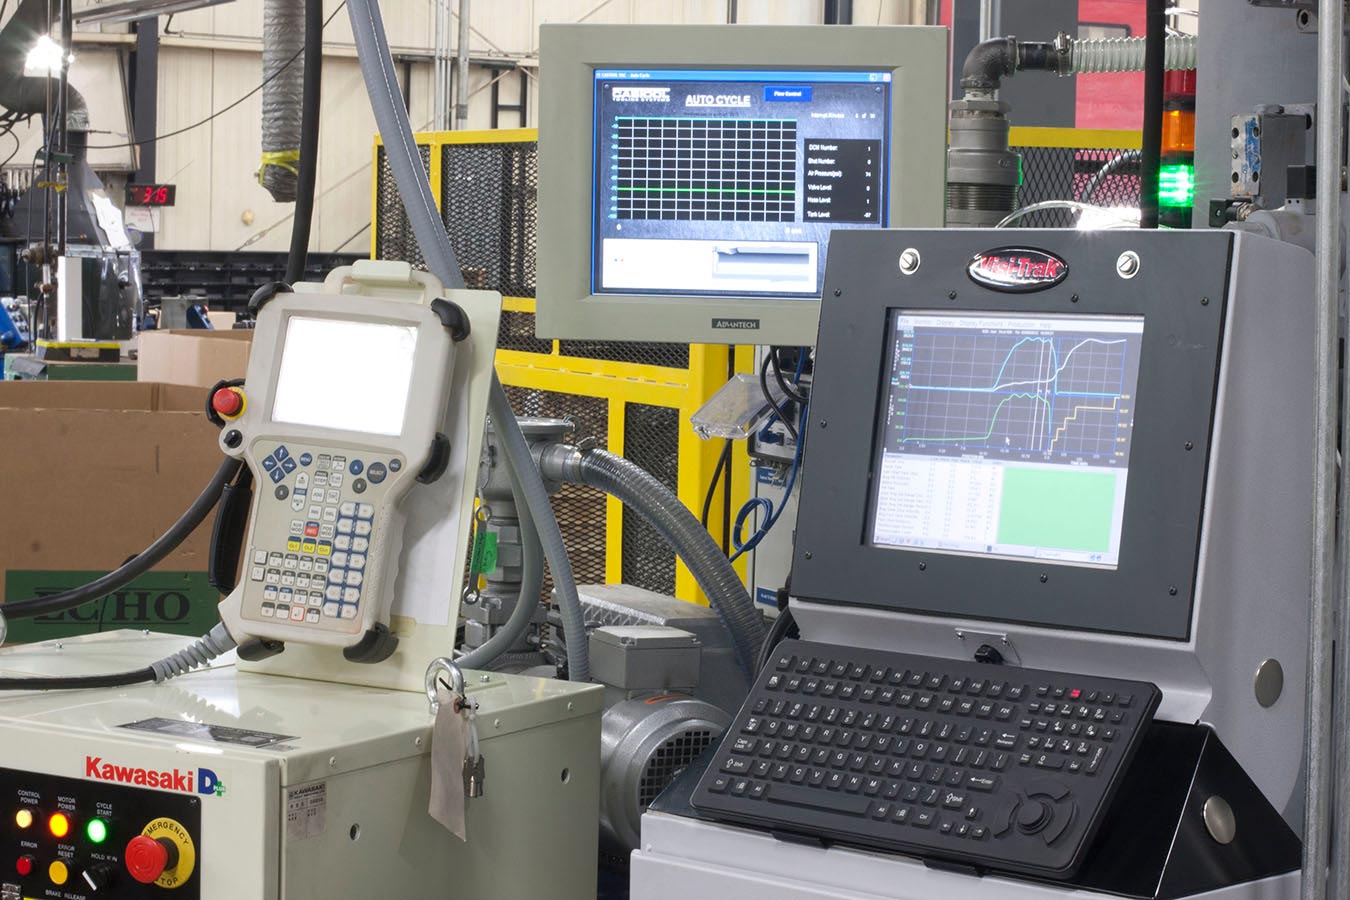 Quality measuring equipment to monitor manufacturing processes of electrical steel laminations in production environment